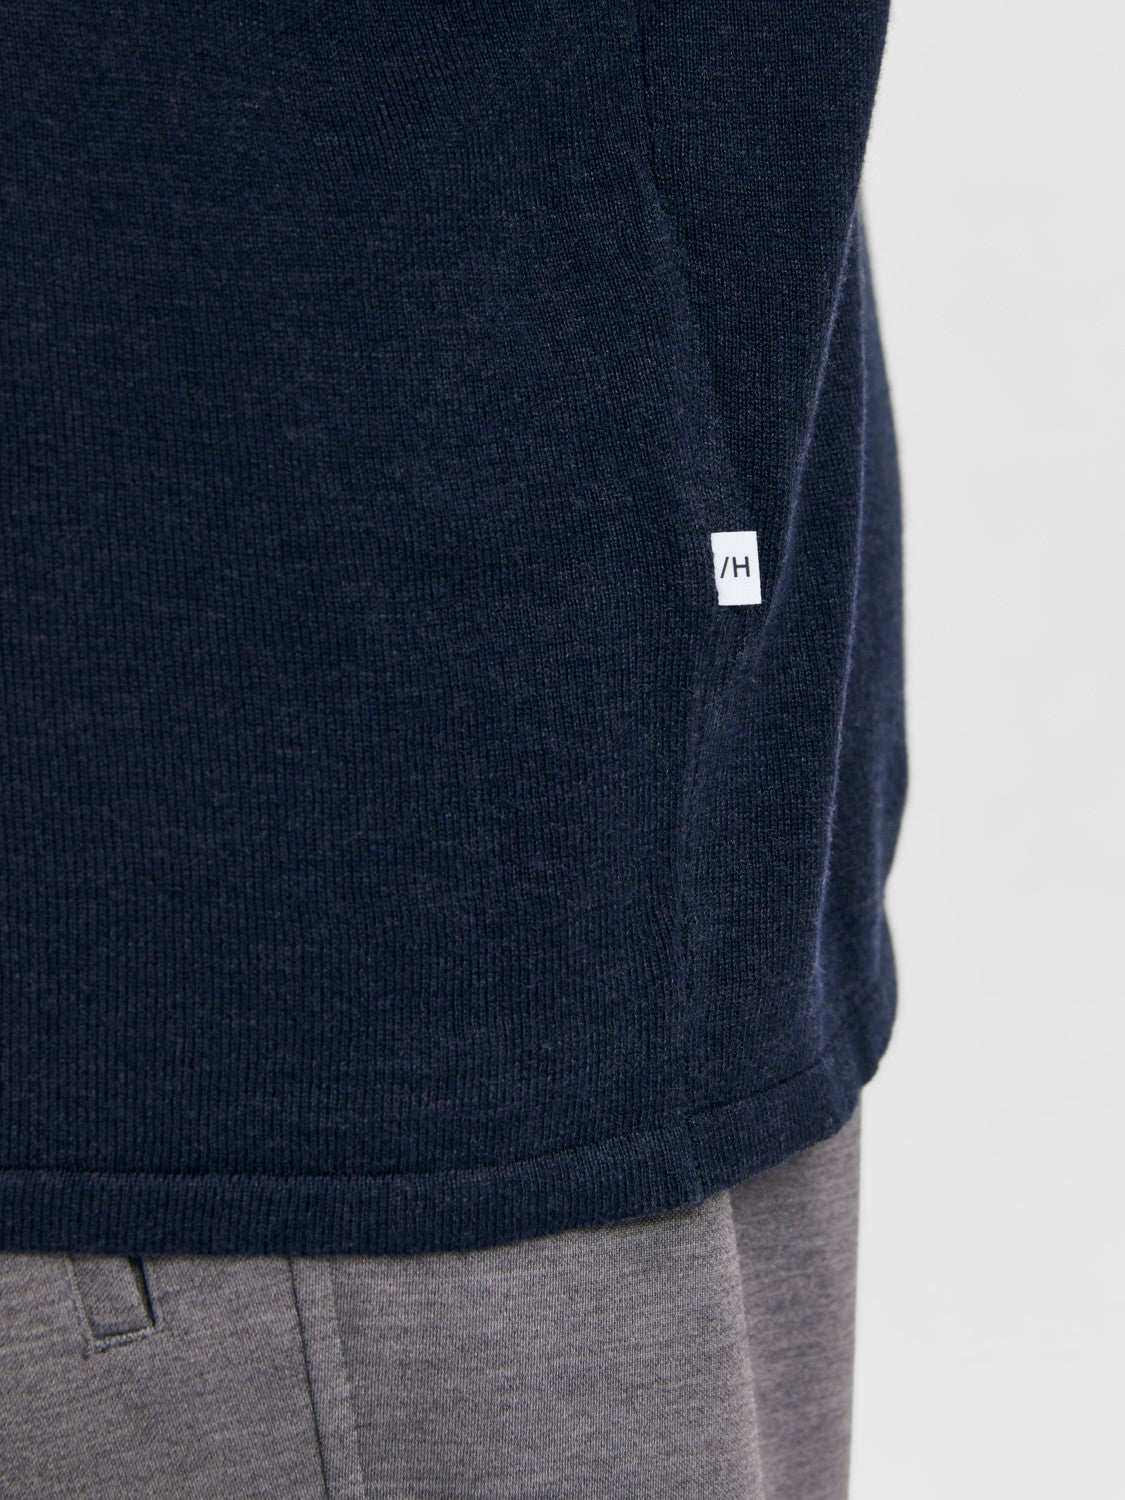 SELECTED HOMME PULLOVER ROME  dark sapphire